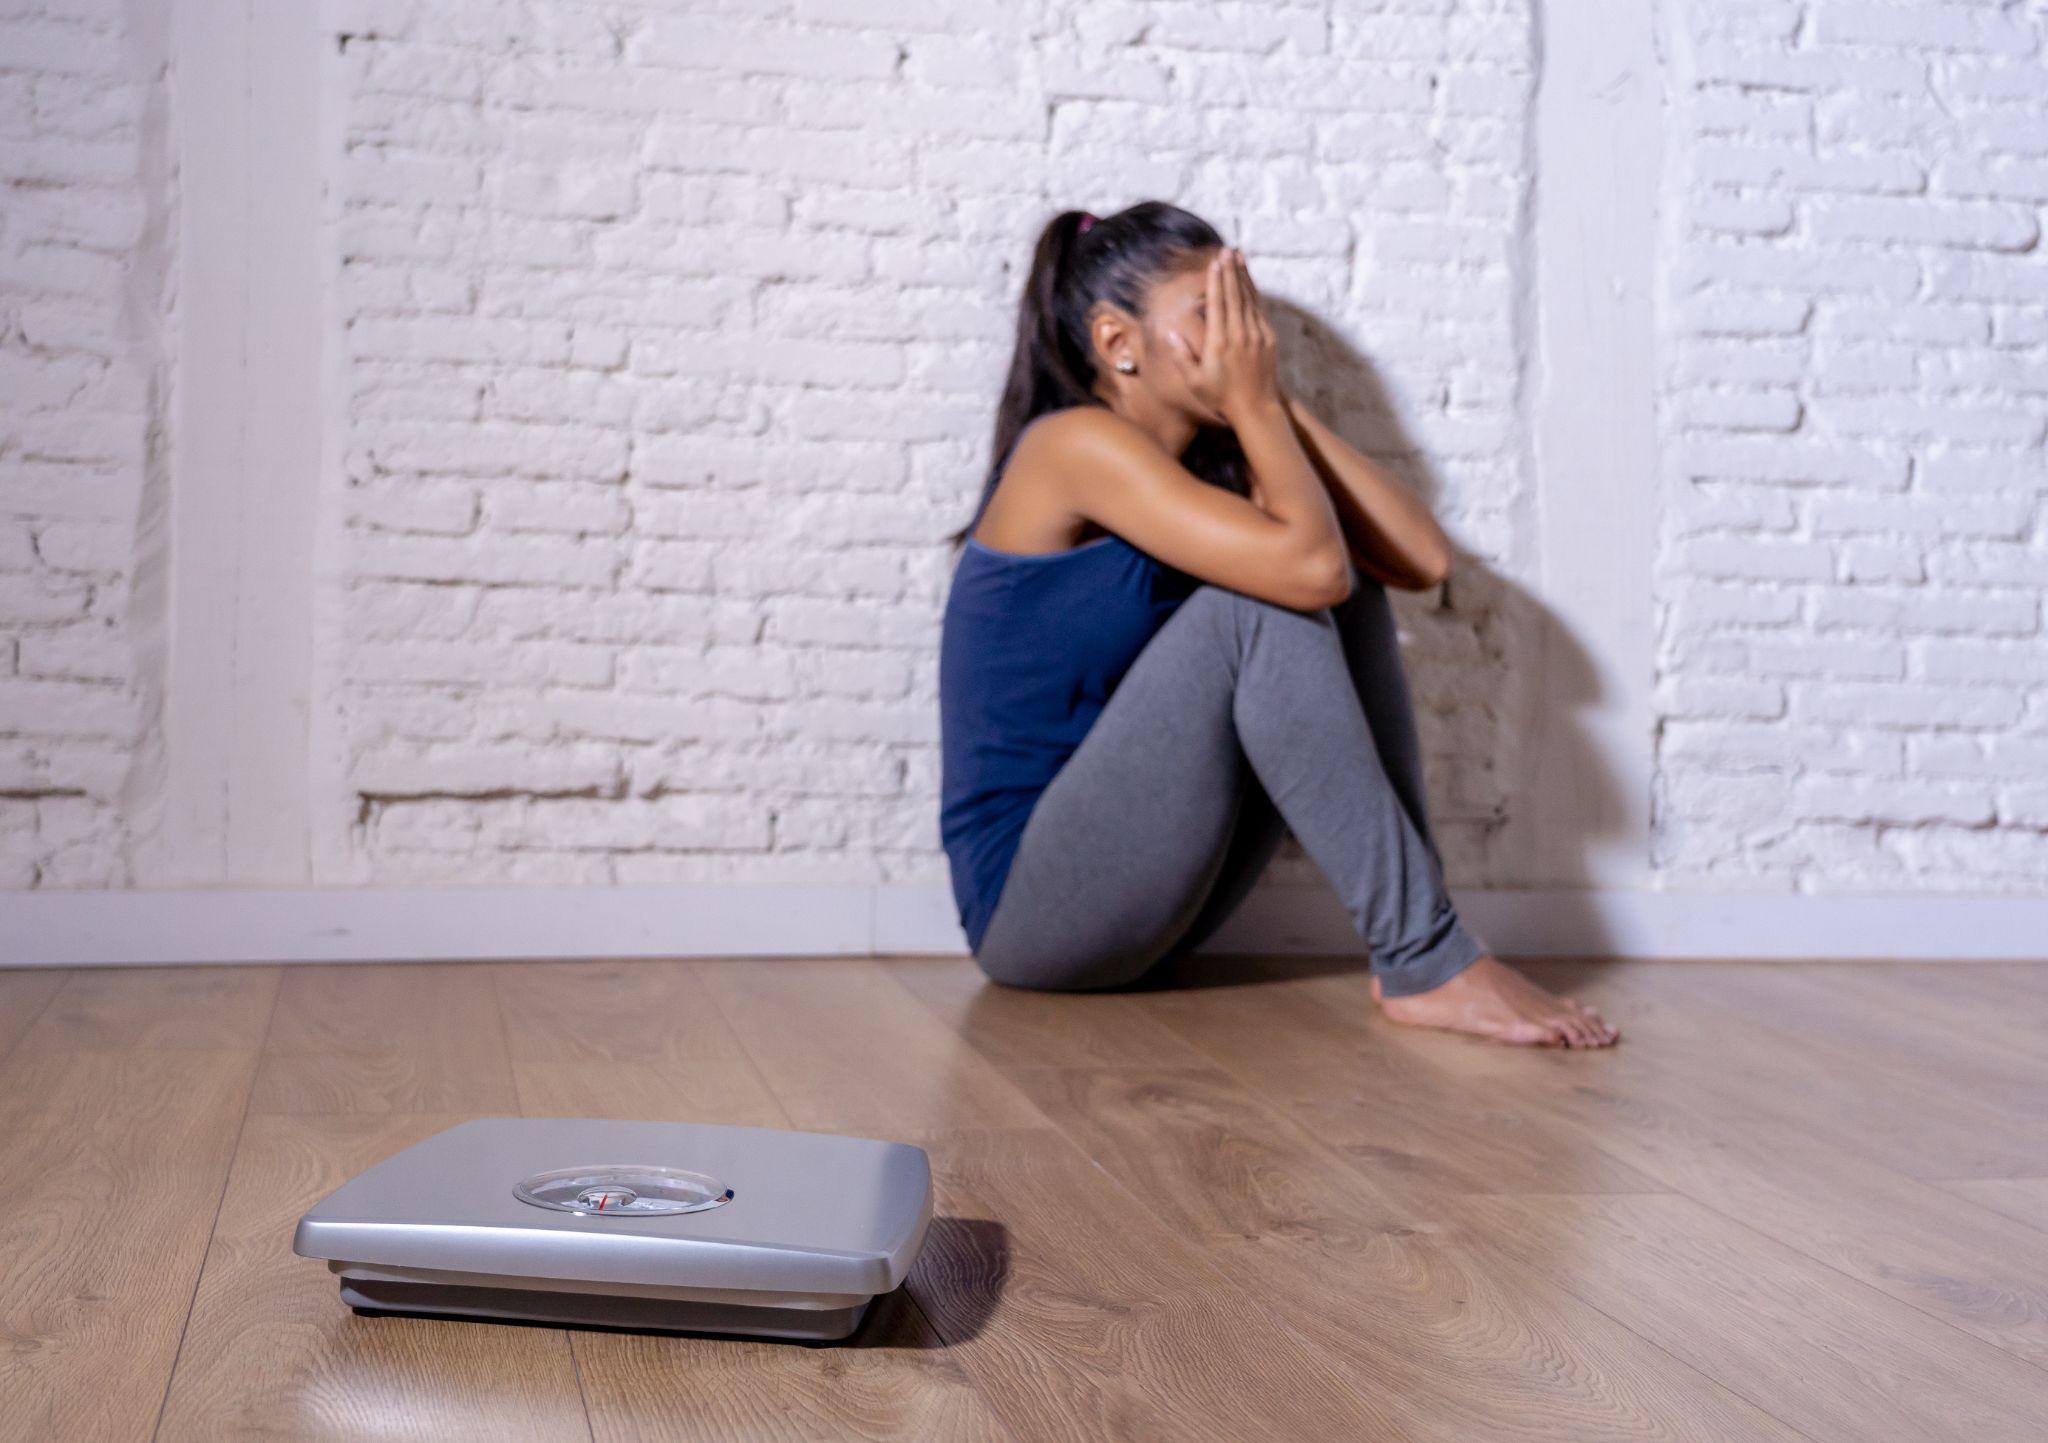 Young teenager woman sitting alone on ground looking at the scale worried and depressed in dieting and eating disorder